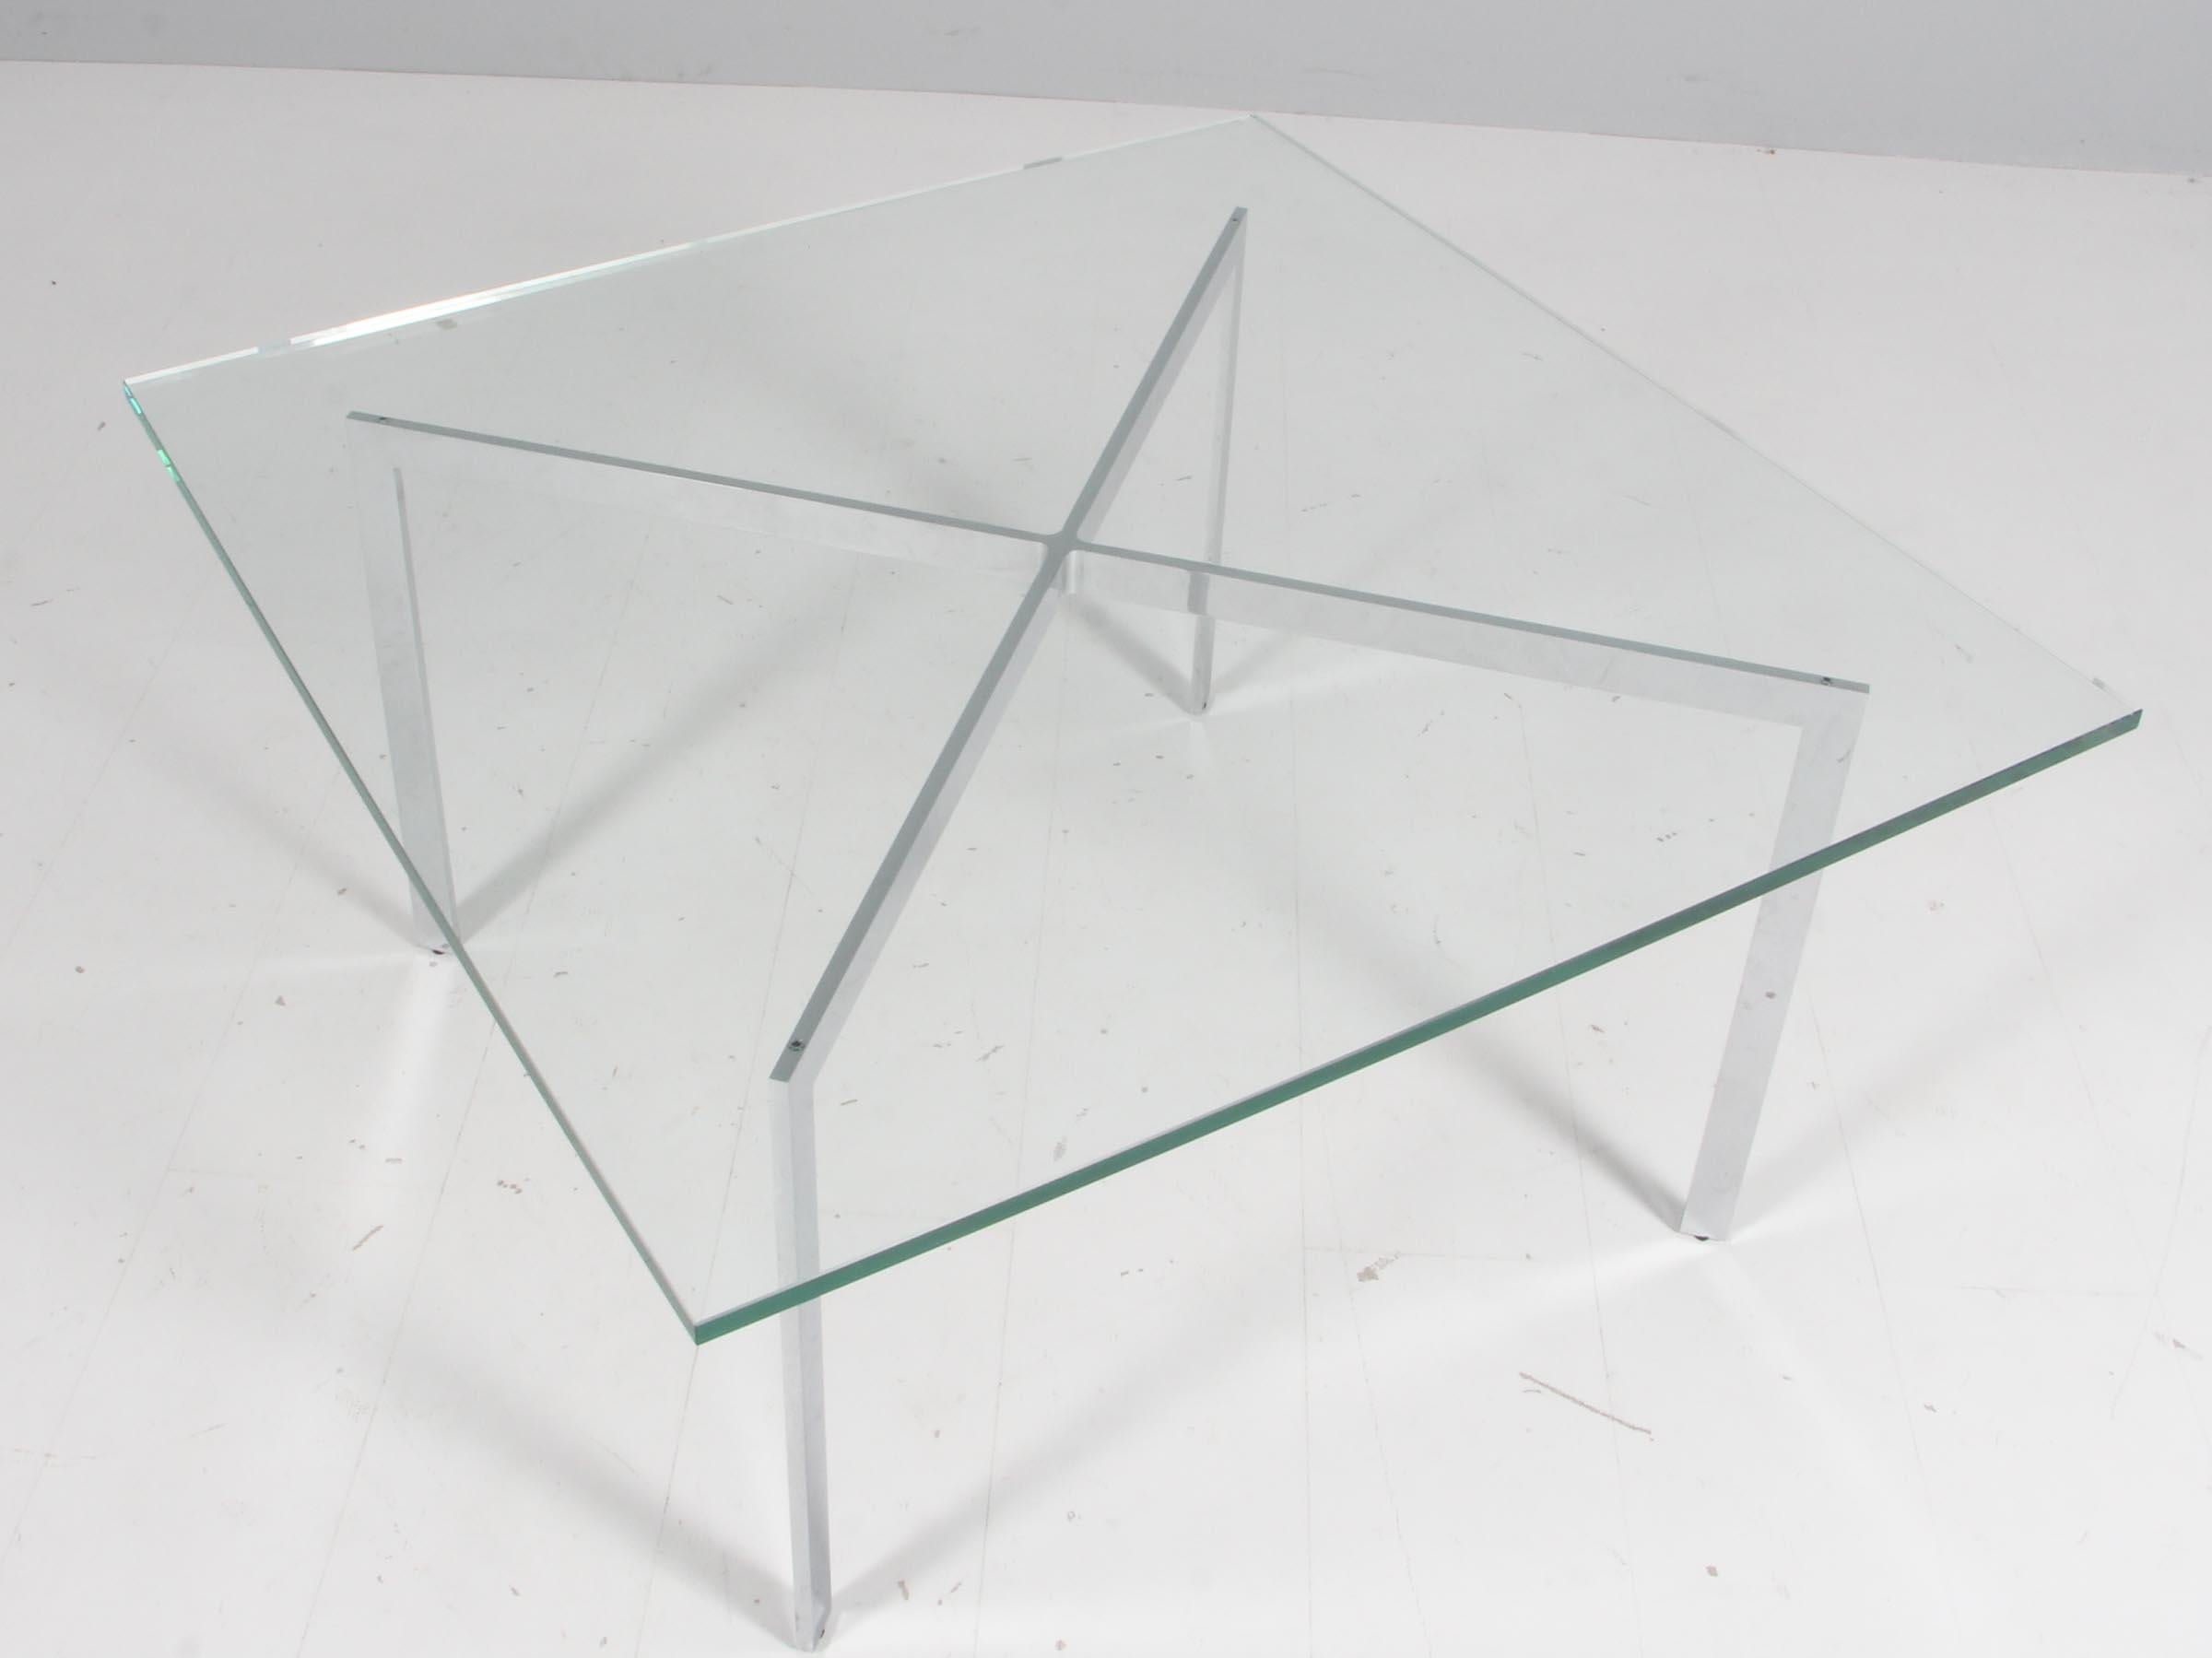 Mies Van der Rohe Knoll Studio Barcelona coffee table with glass top

Offered for sale is a Knoll Studio Mies Van der Rohe Barcelona coffee table with a substantial glass top. 